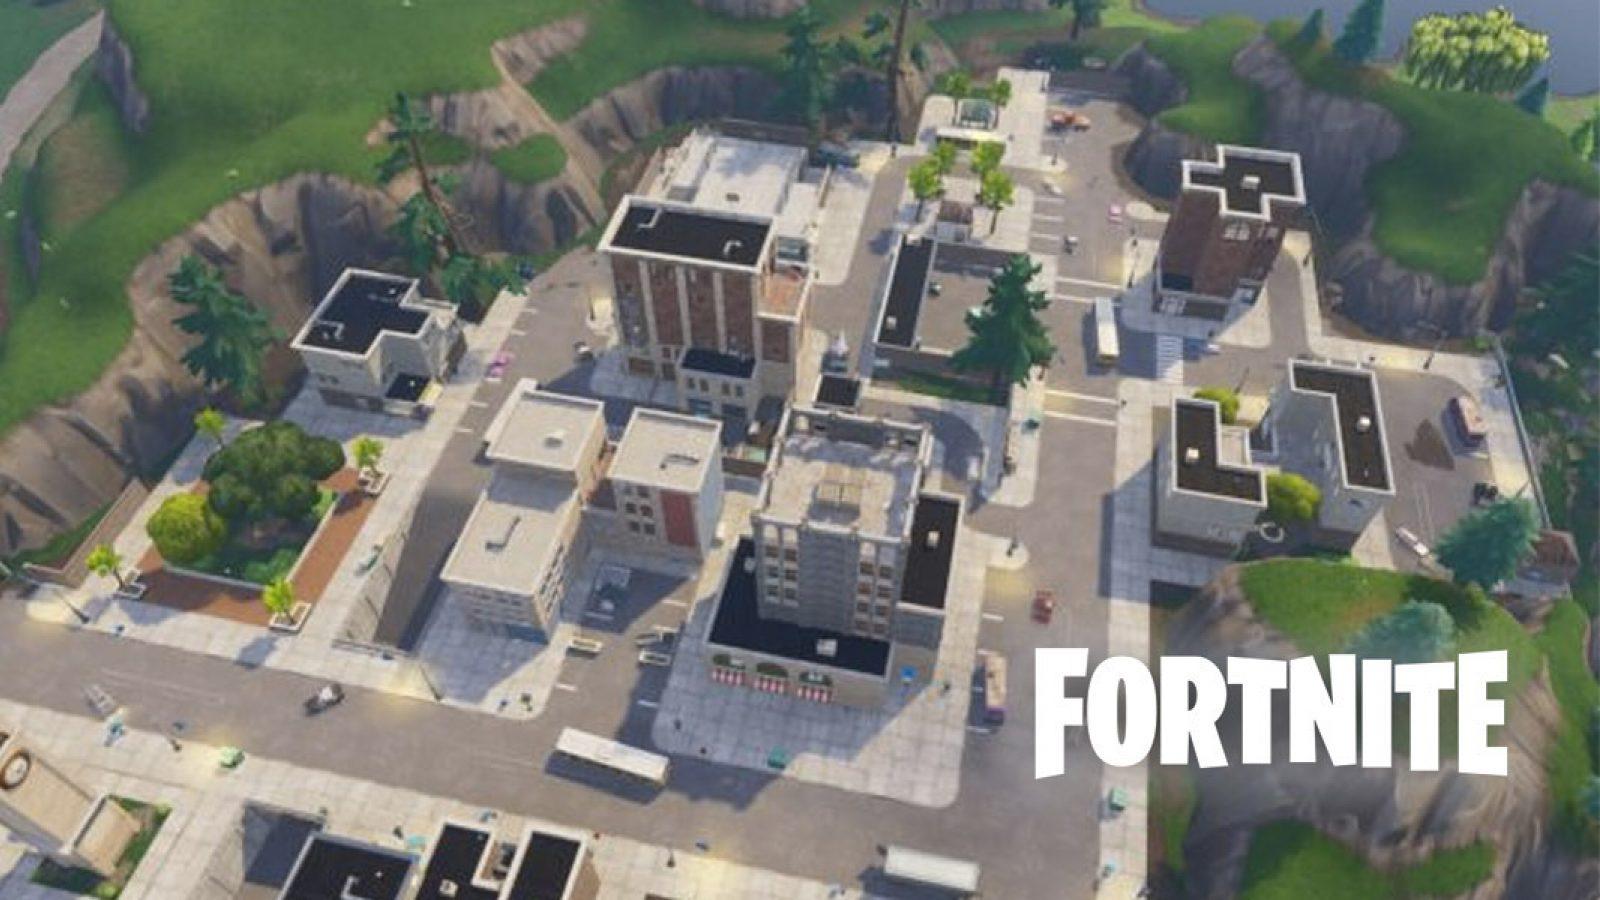 A new building may be arriving to Fortnite's Tilted Towers